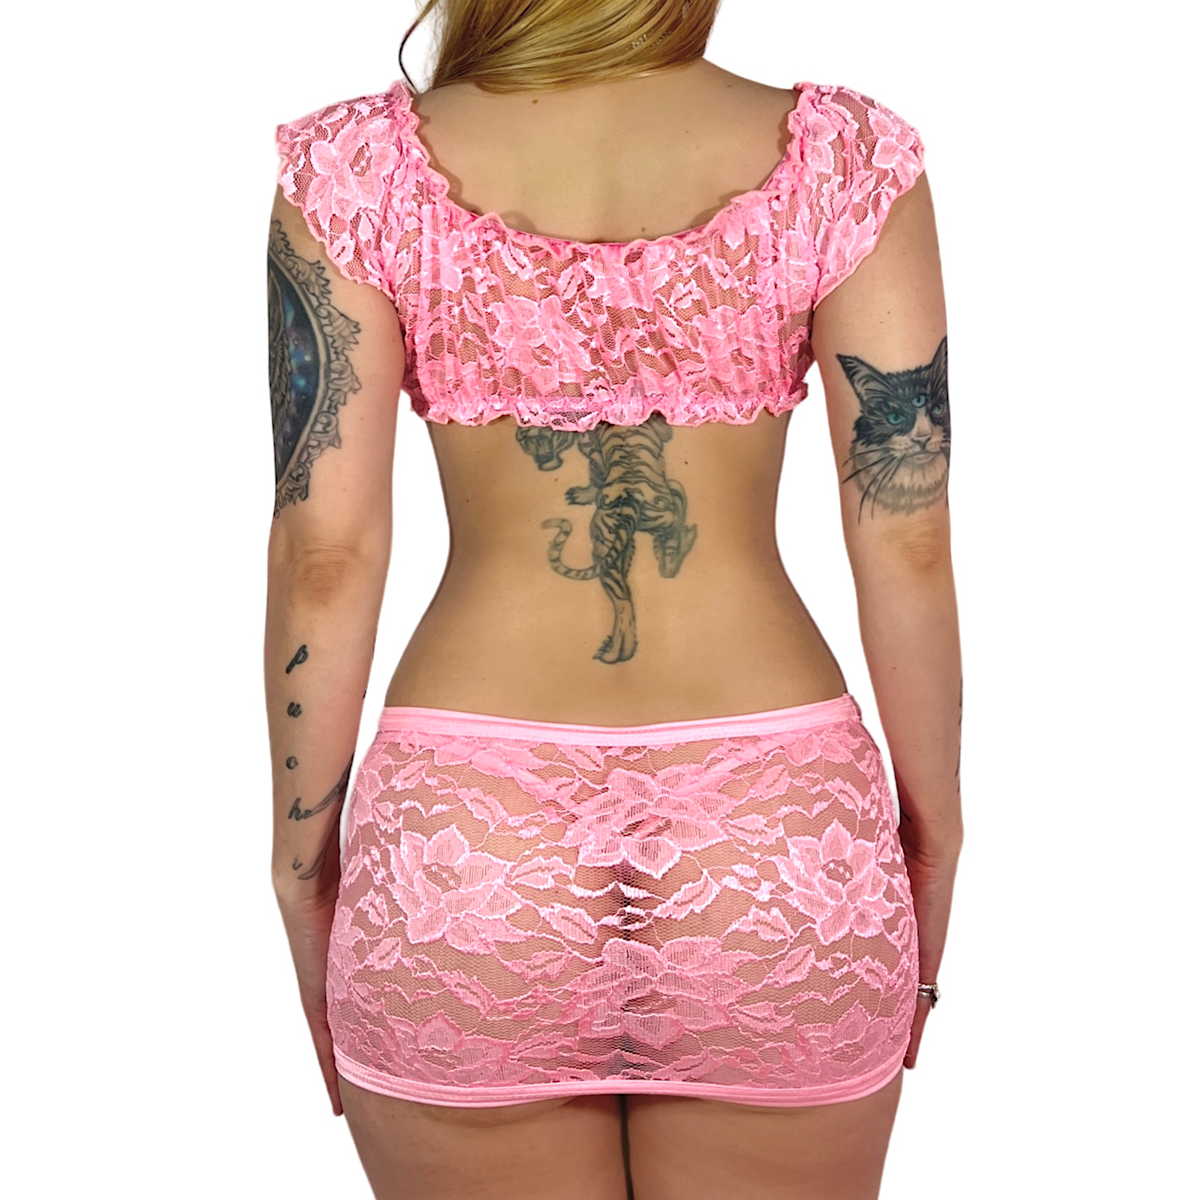 Just A Girl Lace Skirt Set: Baby Pink